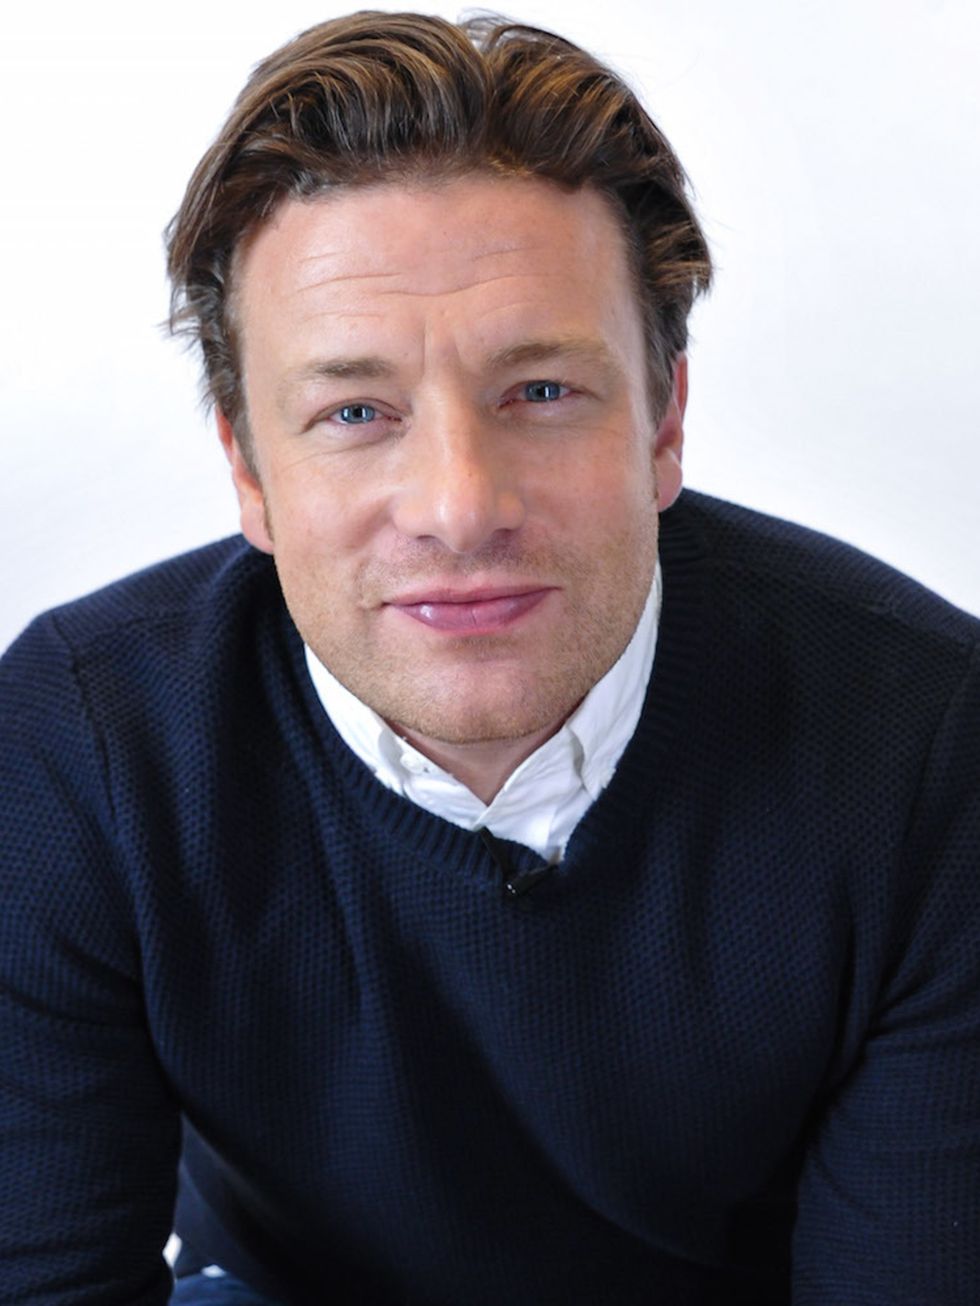 <p><strong>Jamie Oliver </strong></p>

<p><strong>Nominated for</strong>: His wonderfully tasty and easy to make dishes - those 15 minute meals have saved our life.</p>